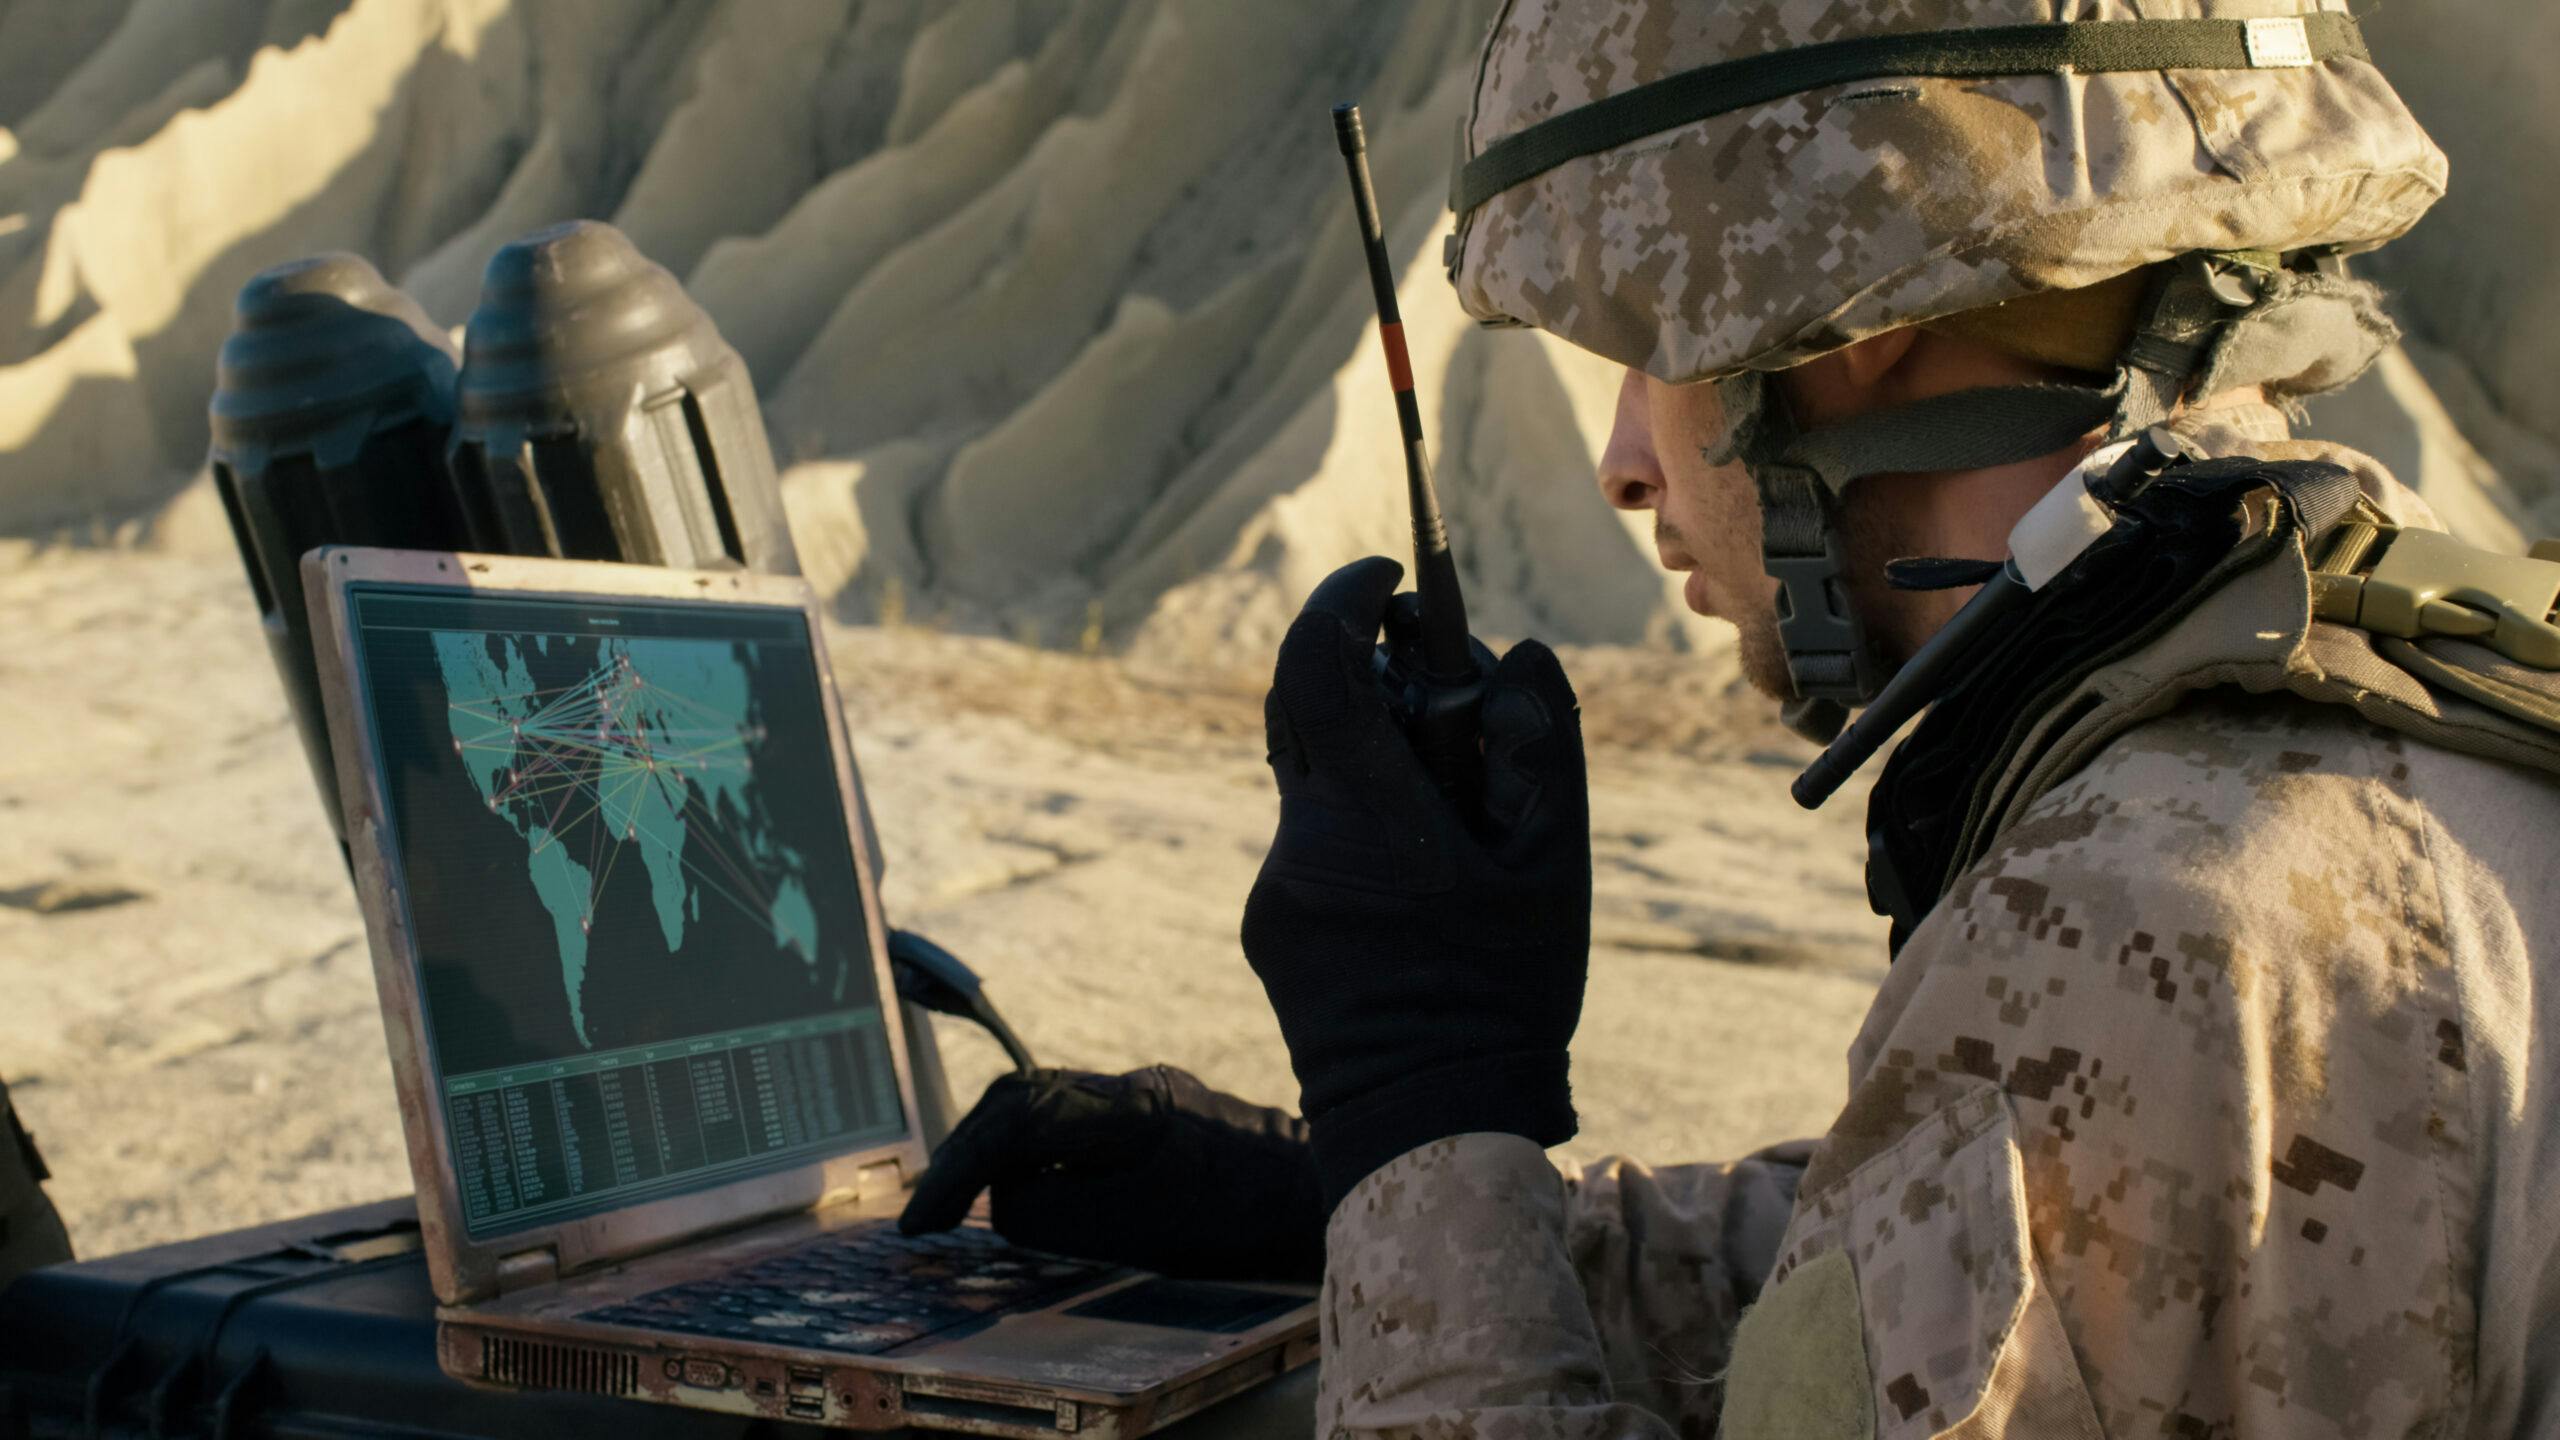 Image of a soldier talking into a walkie-talkie while looking at a laptop screen with a global map on it.